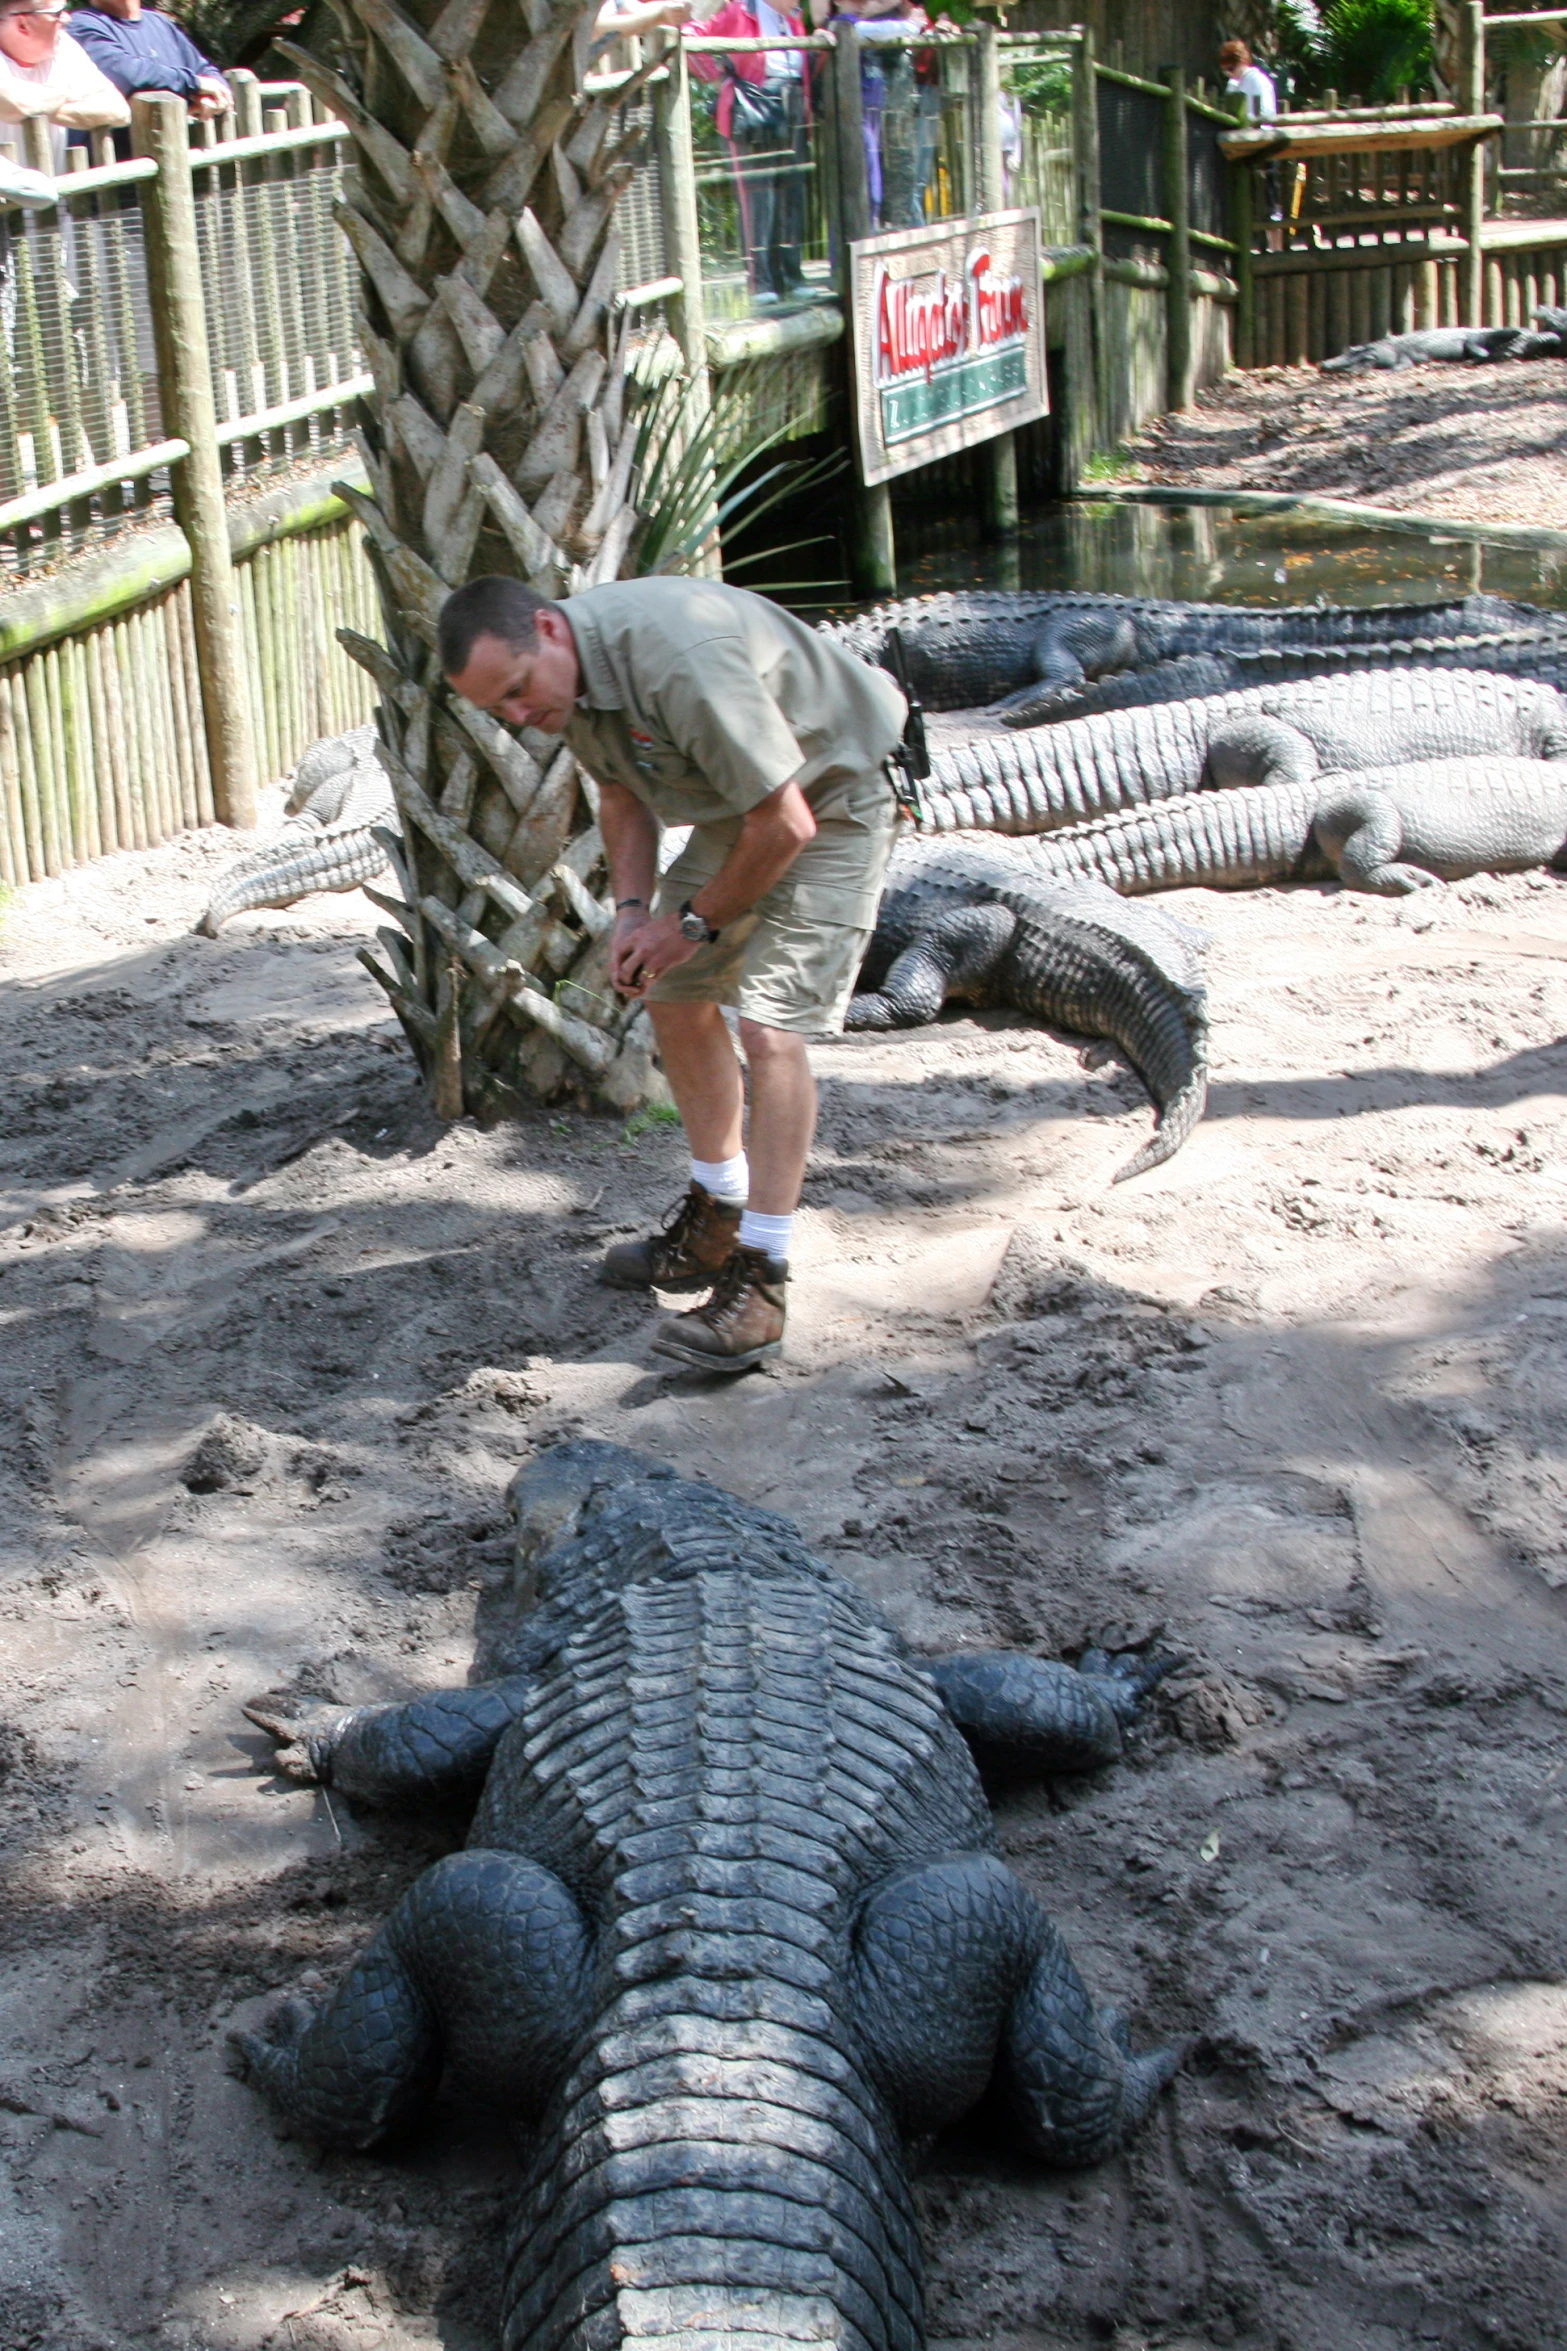 a man standing near a large alligator sitting on the ground